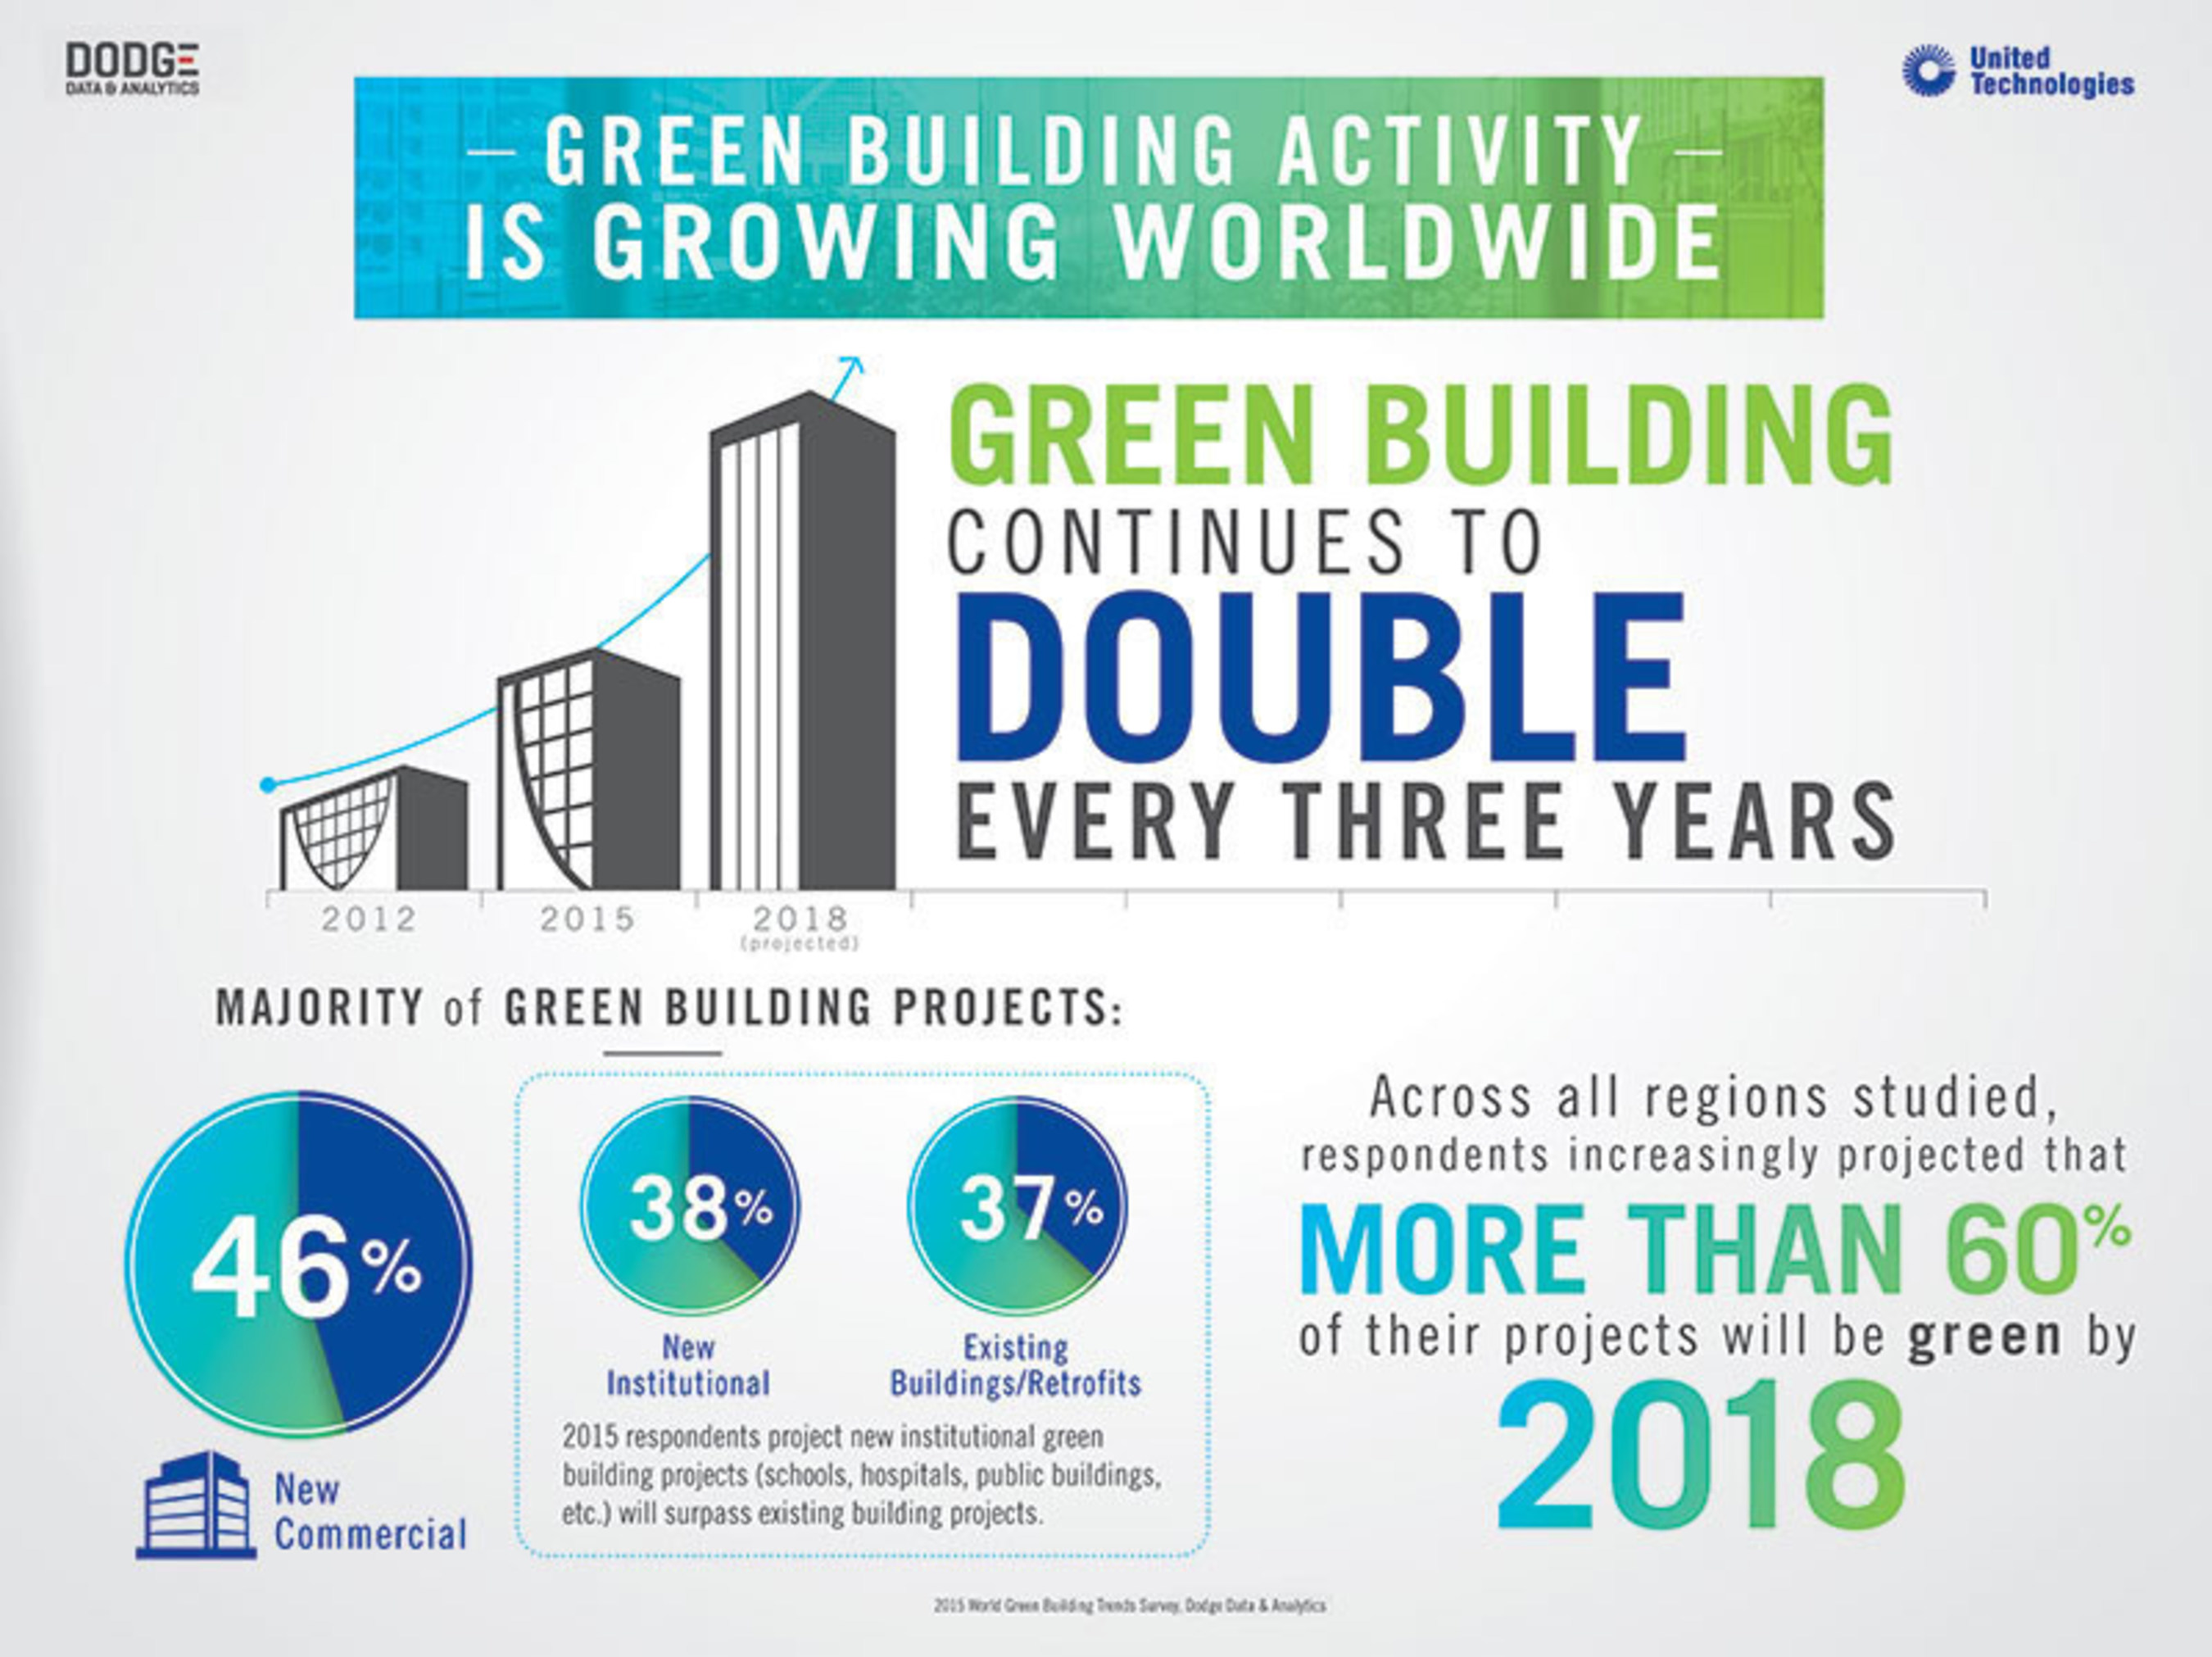 Green building continues to double every three years.